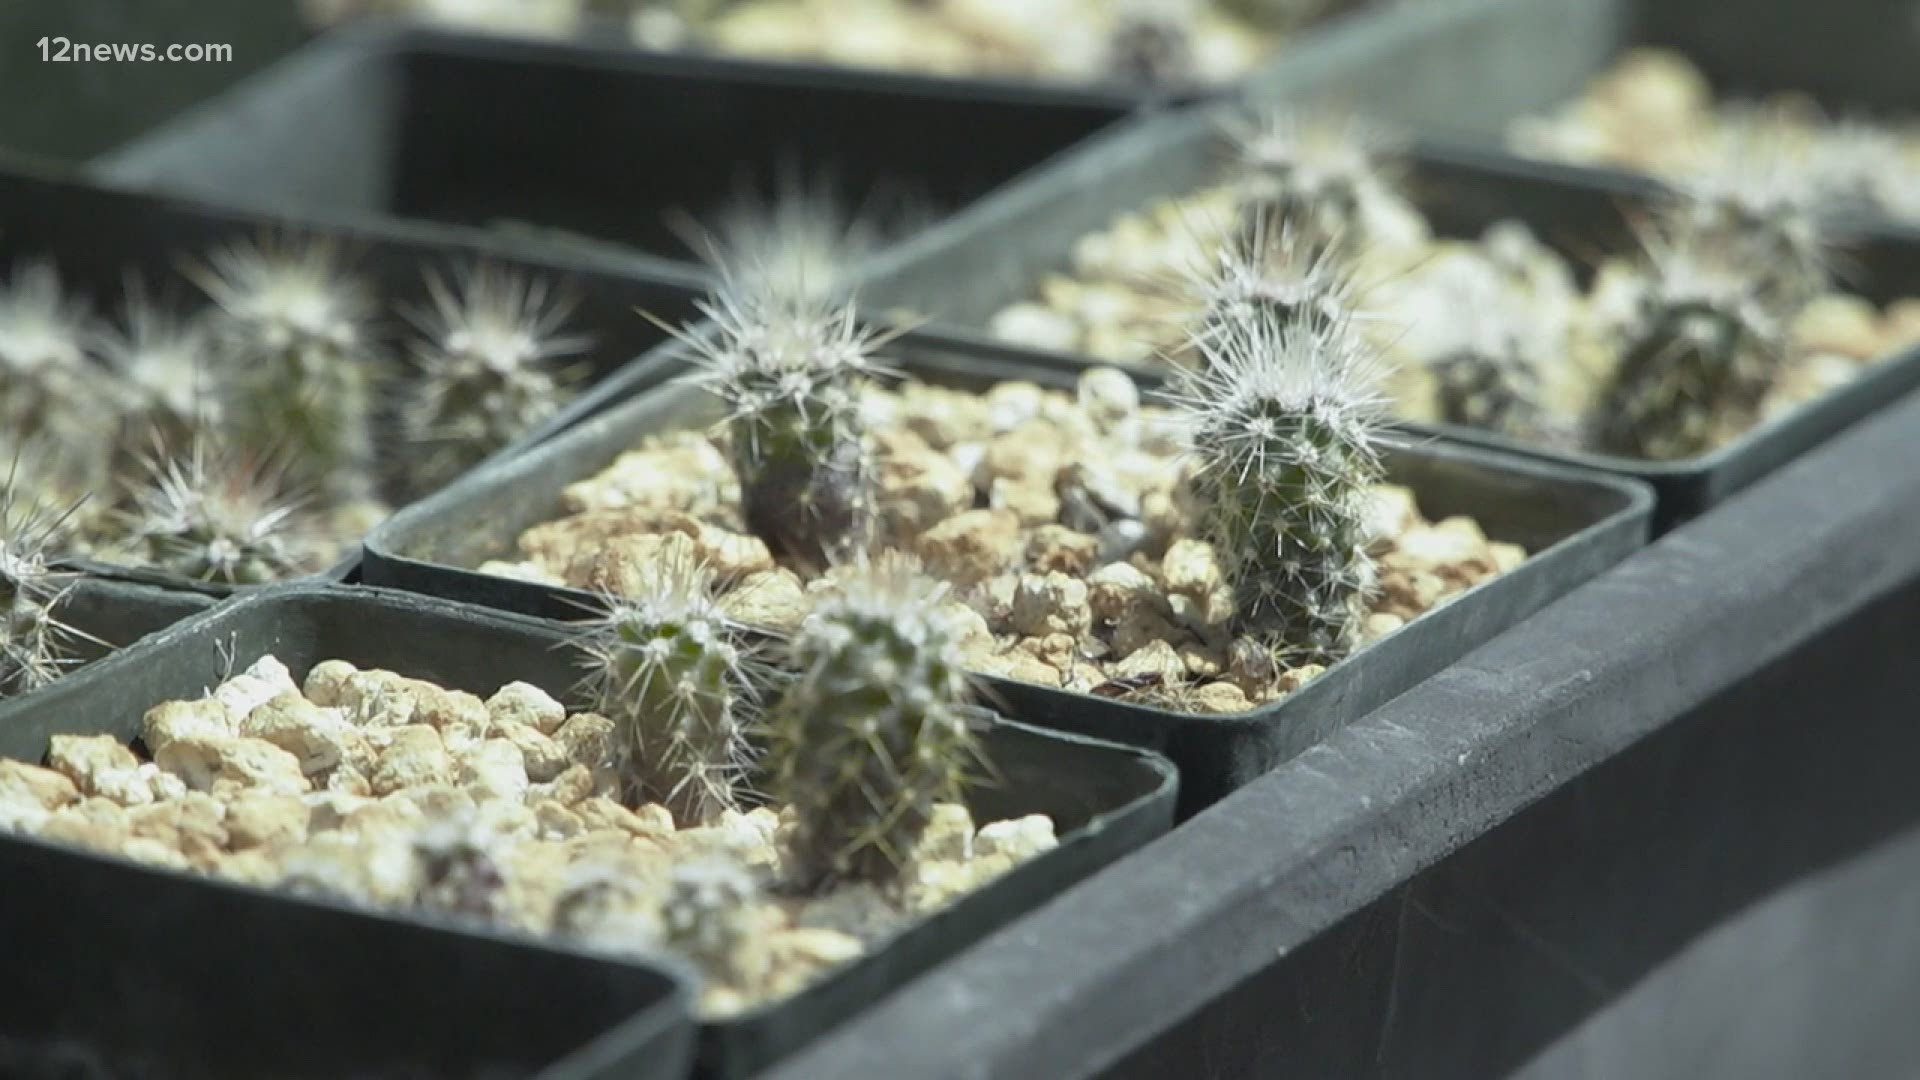 The Arizona Department of Transportation teamed up with Desert Botanical Garden to save an endangered species of cactus that's getting removed for a new bridge.